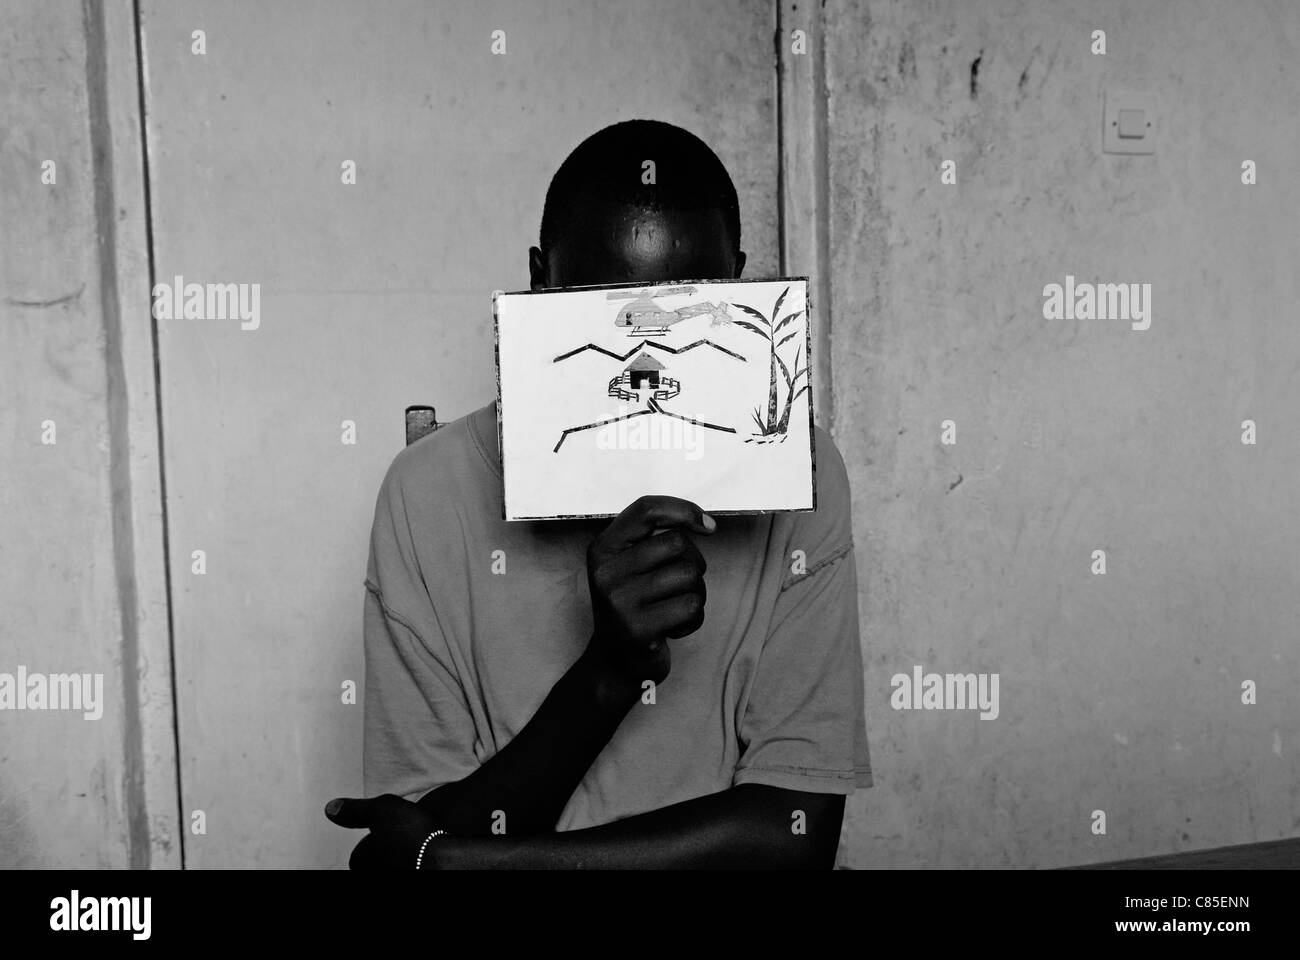 Former child soldier holds a drawing depicting war atrocities in the Center for Transit and Orientation for former child soldiers operated by CAJED, a Congolese NGO supported by UNICEF that works with disadvantaged children and youth in the city of Goma. North Kivu province DR Congo Africa Stock Photo